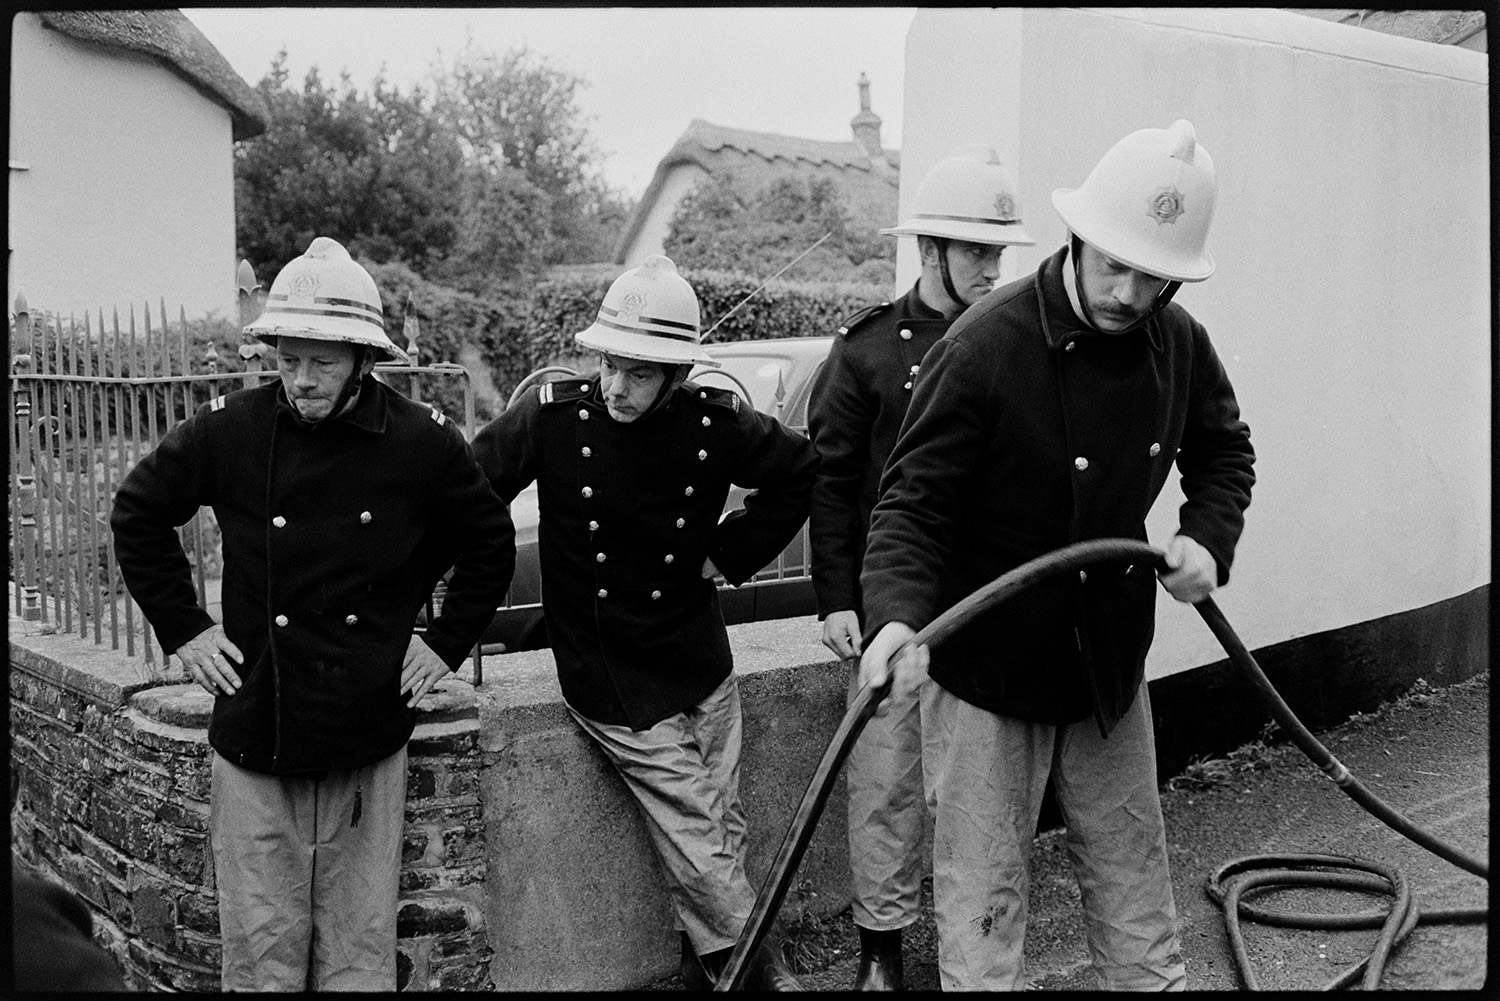 Firemen in uniform at fire. Chatting afterwards, helmets.
[Four firemen from the Hatherleigh Fire Brigade working on an incident in Fore Street, Dolton. One fireman is holding a hose. A house with a thatched roof is visible in the background.]